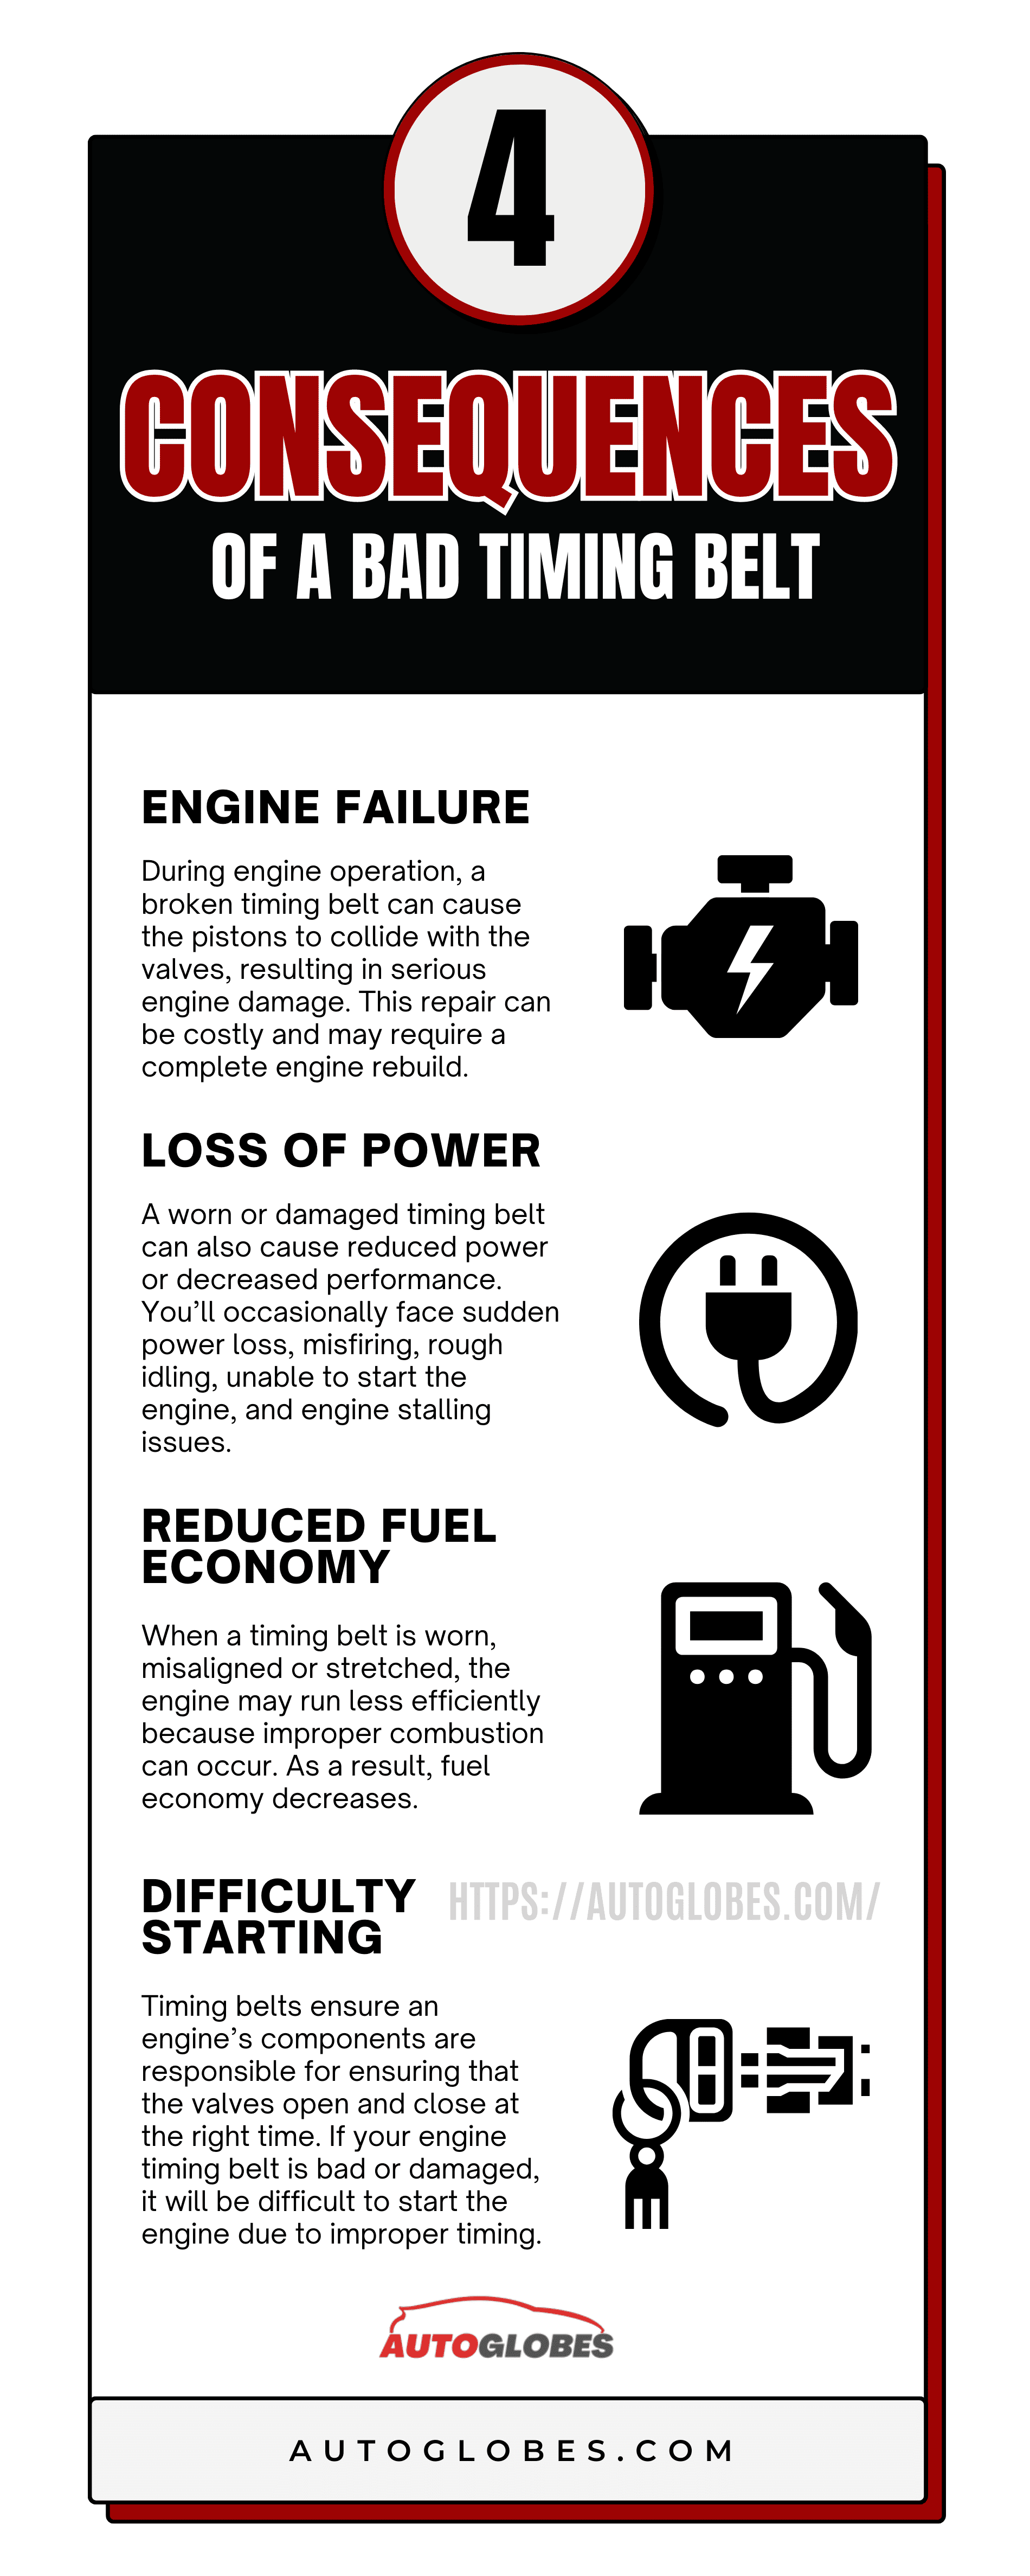 4 Consequences of a Bad Timing Belt Infographic